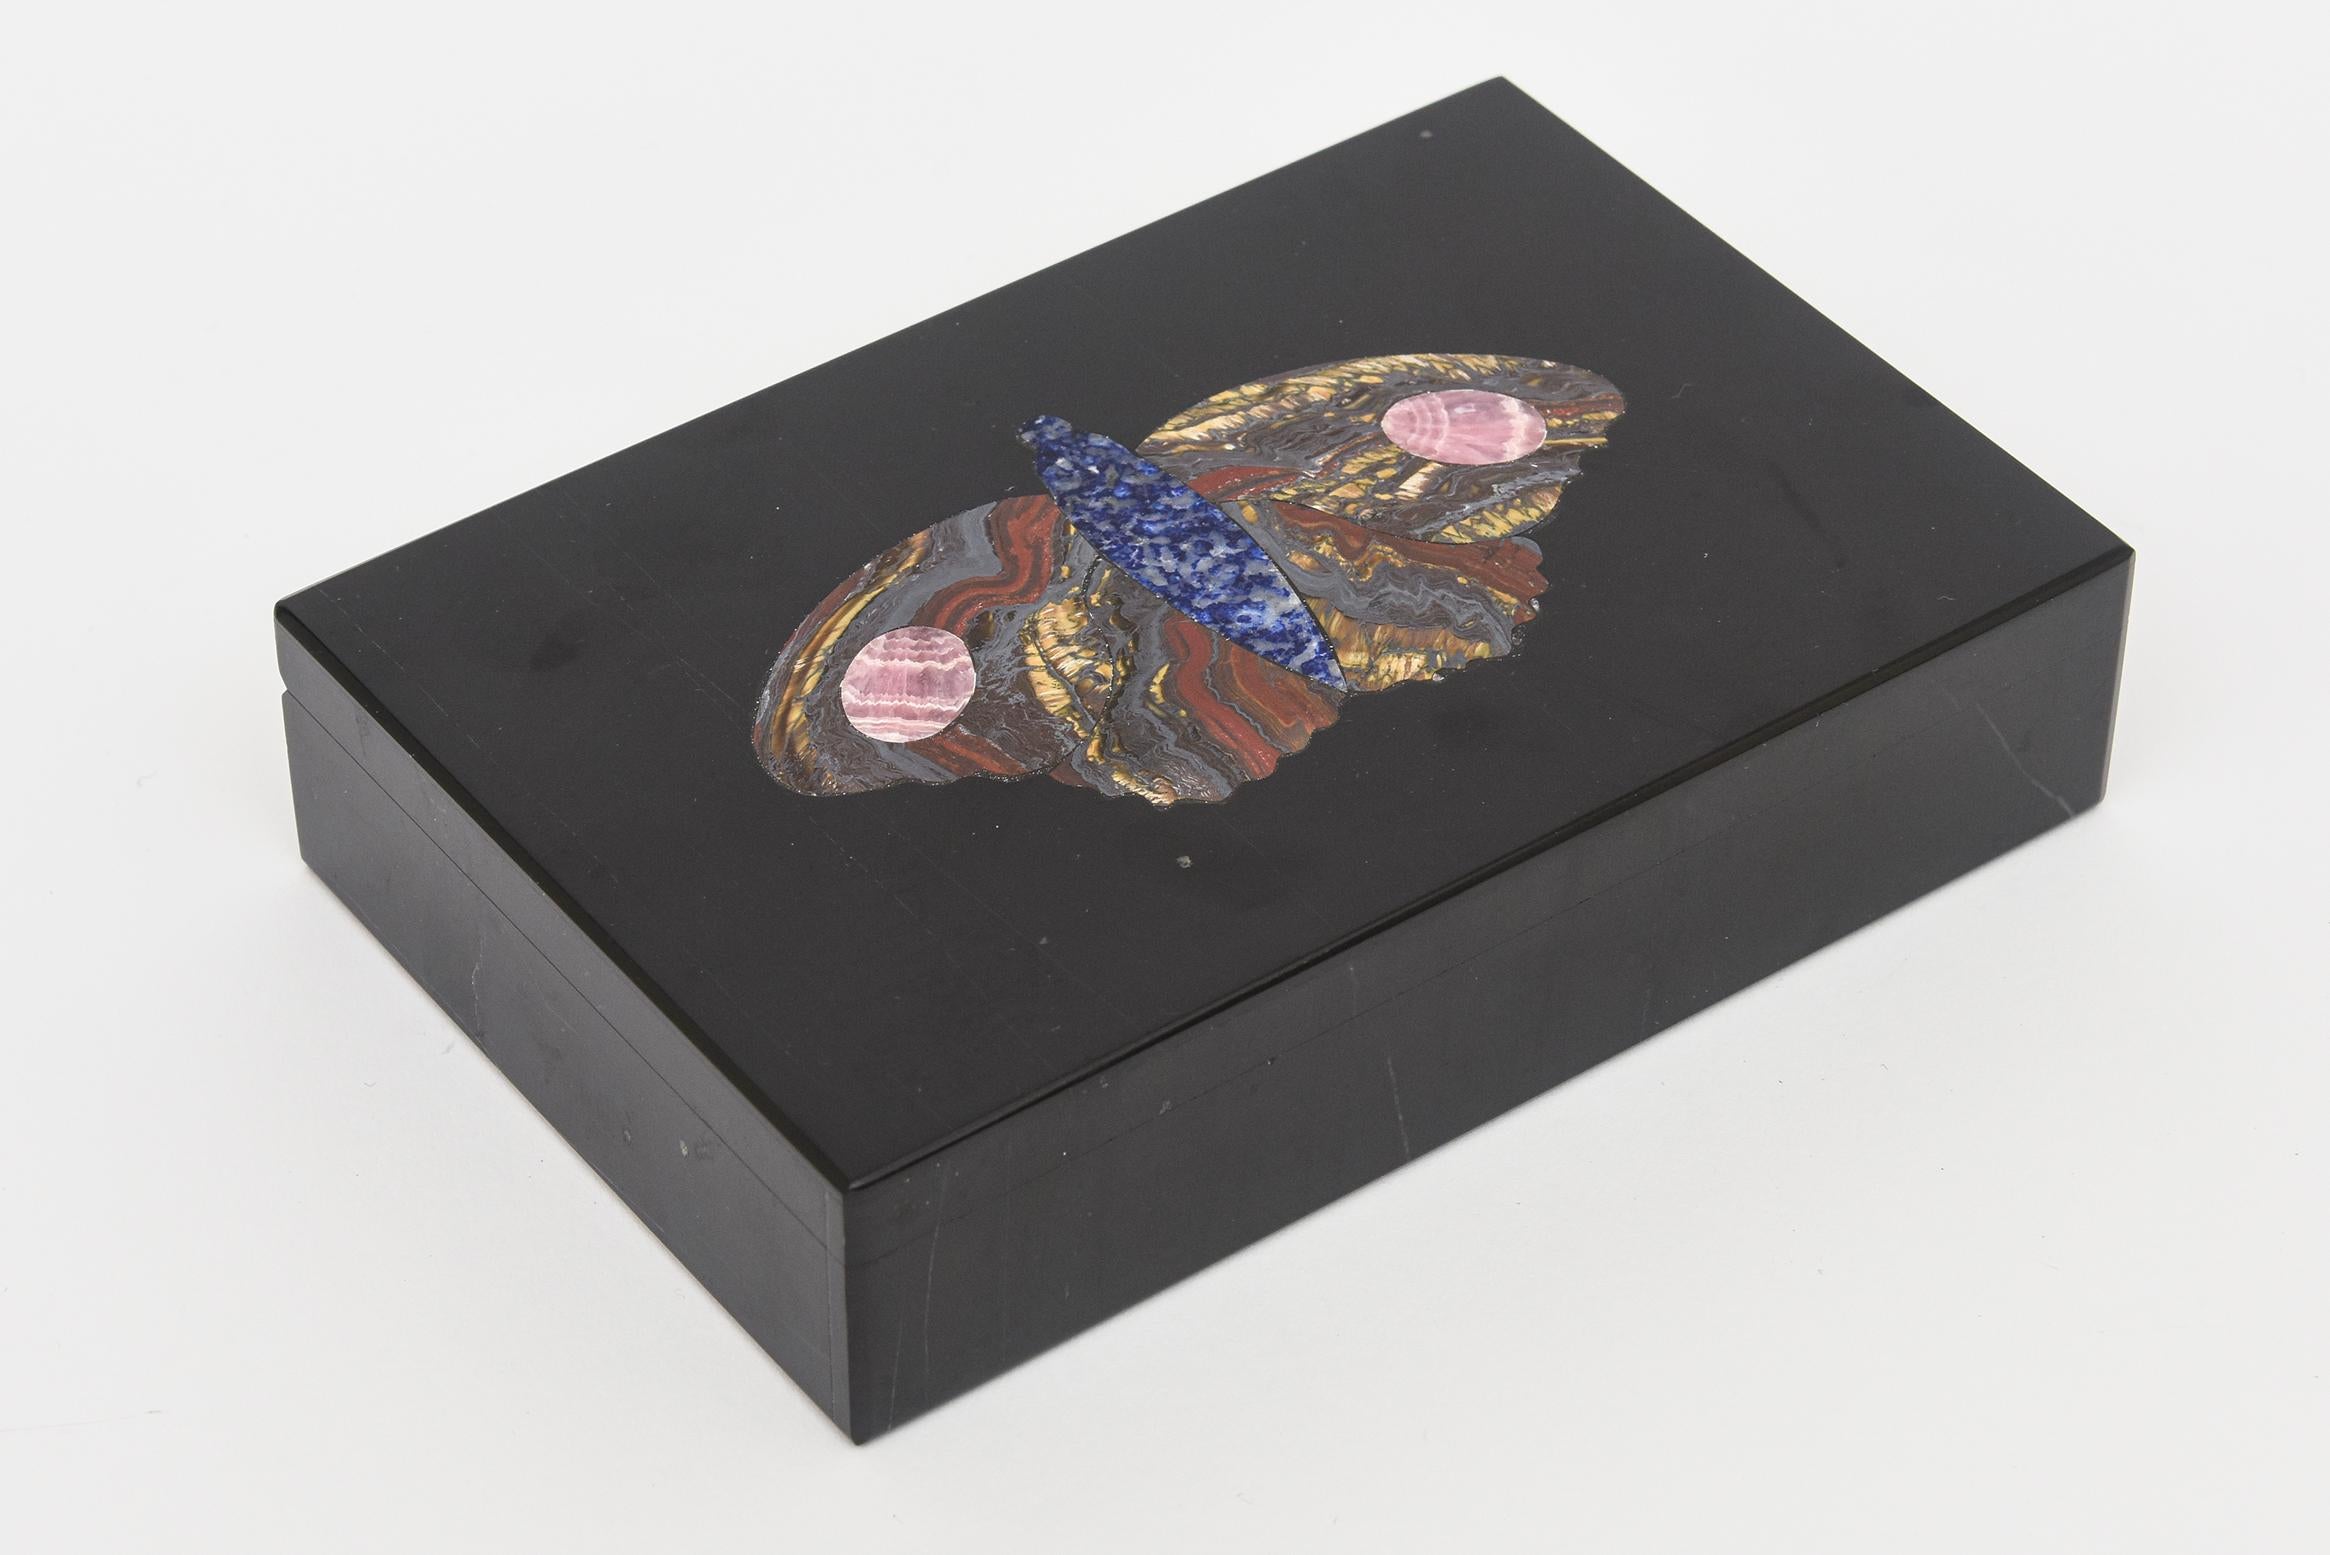 This stunning and hard to find vintage modernist Pietra Dura Italian stone hinged box has an elaborate butterfly in the center of the black marble. The sections of the butterfly have segmented lapis lazuli, tiger iron stone, pink rhodochrosite and a